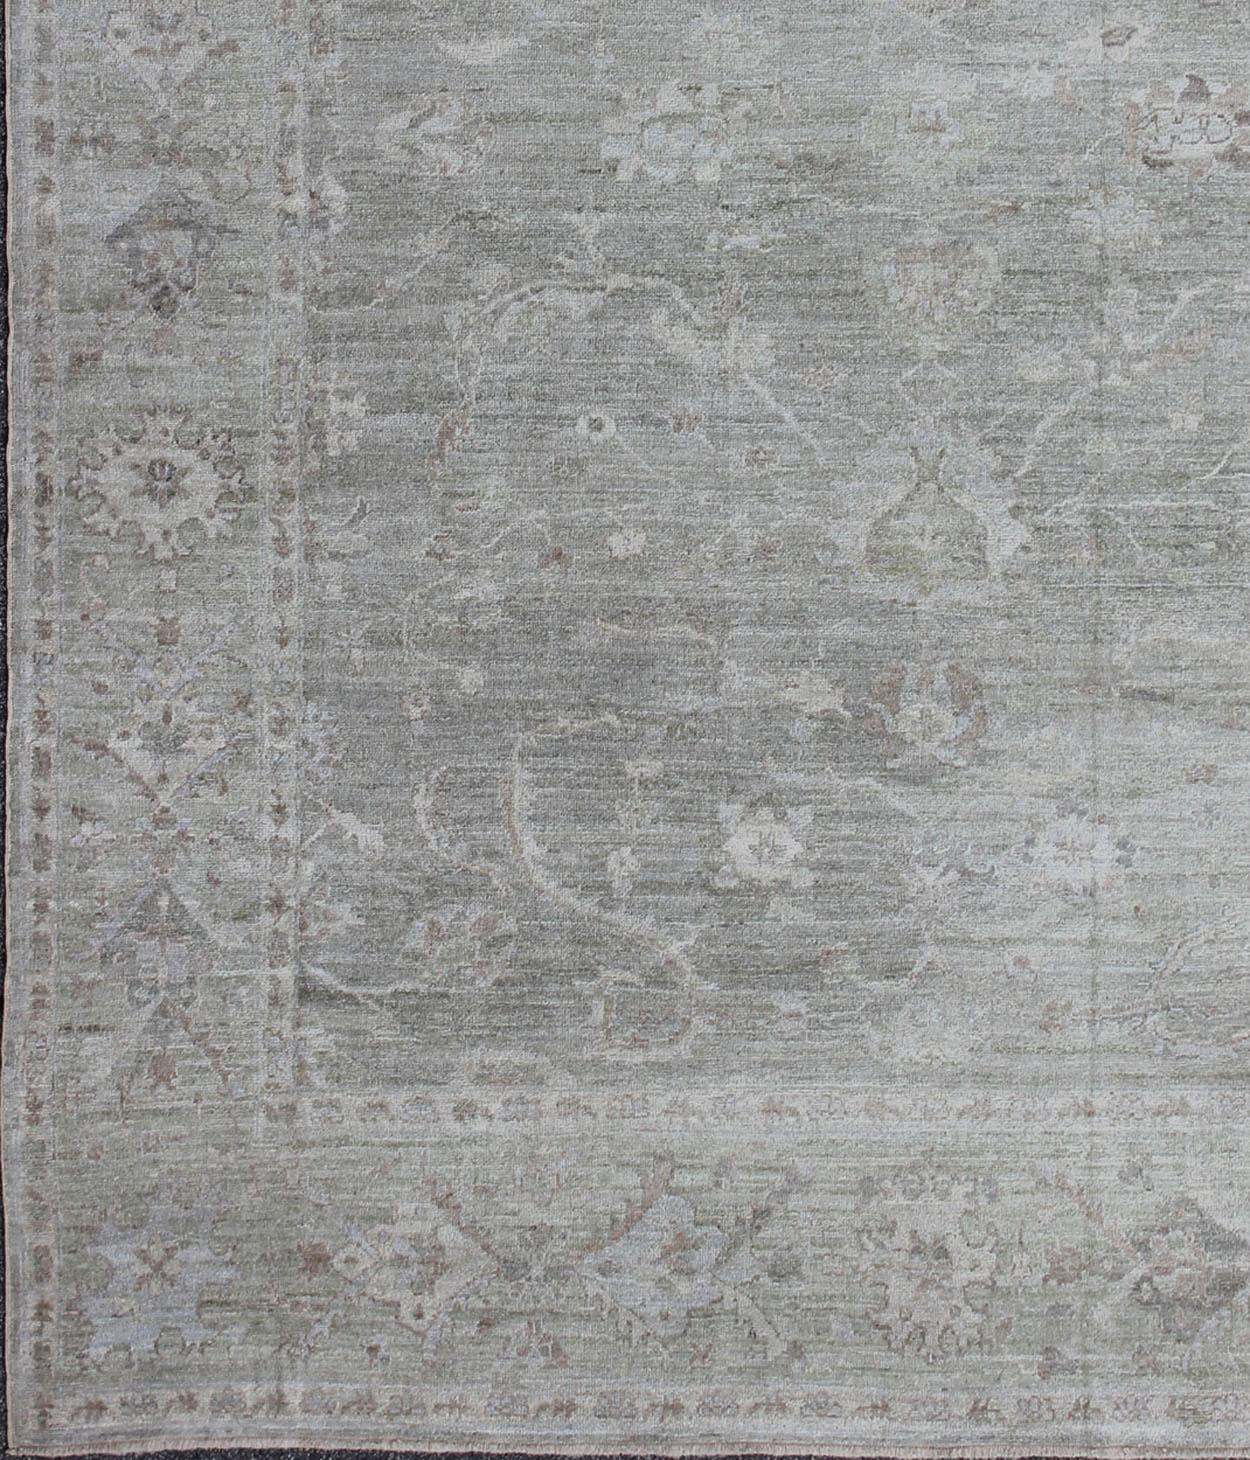 Hand-Knotted Large Turkish Angora Oushak Rug with All-Over Vining Floral Design in Neutral For Sale